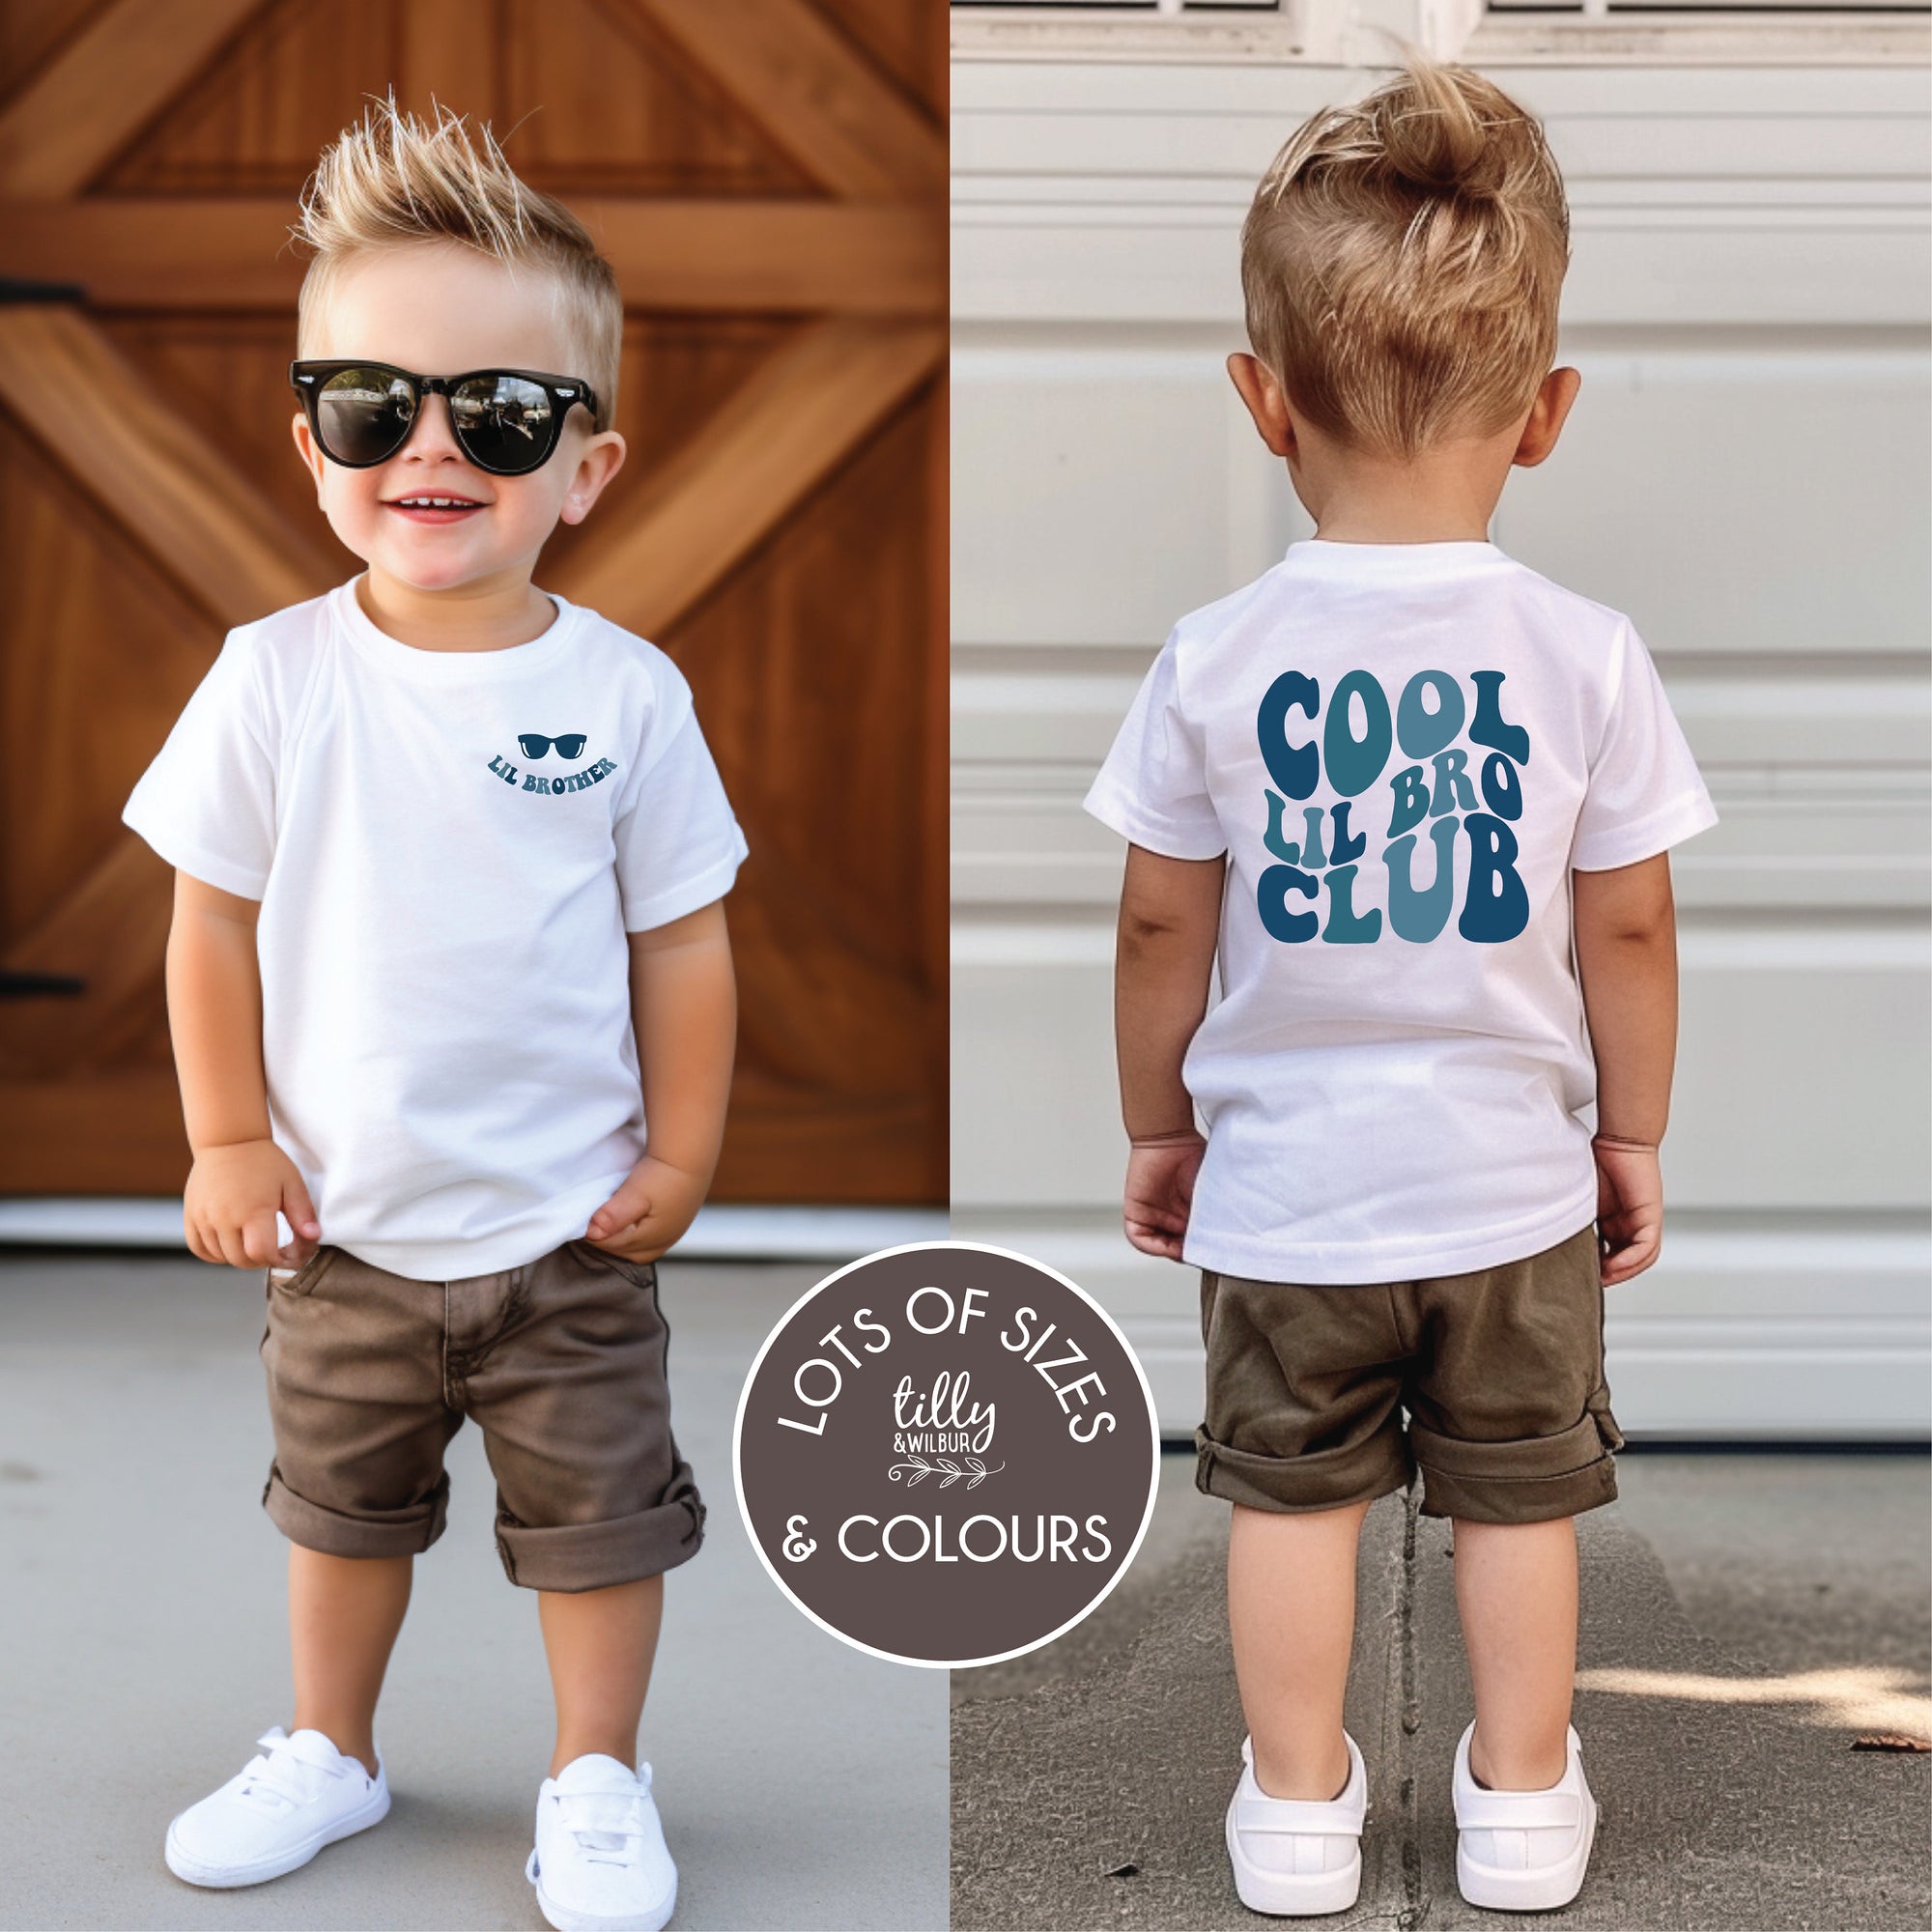 Cool Lil Bro Club T-Shirt, Big Brother T-Shirt, Front And Back, Matching Big Bro Lil Bro, Big Brother Little Brother, Pregnancy Announcement